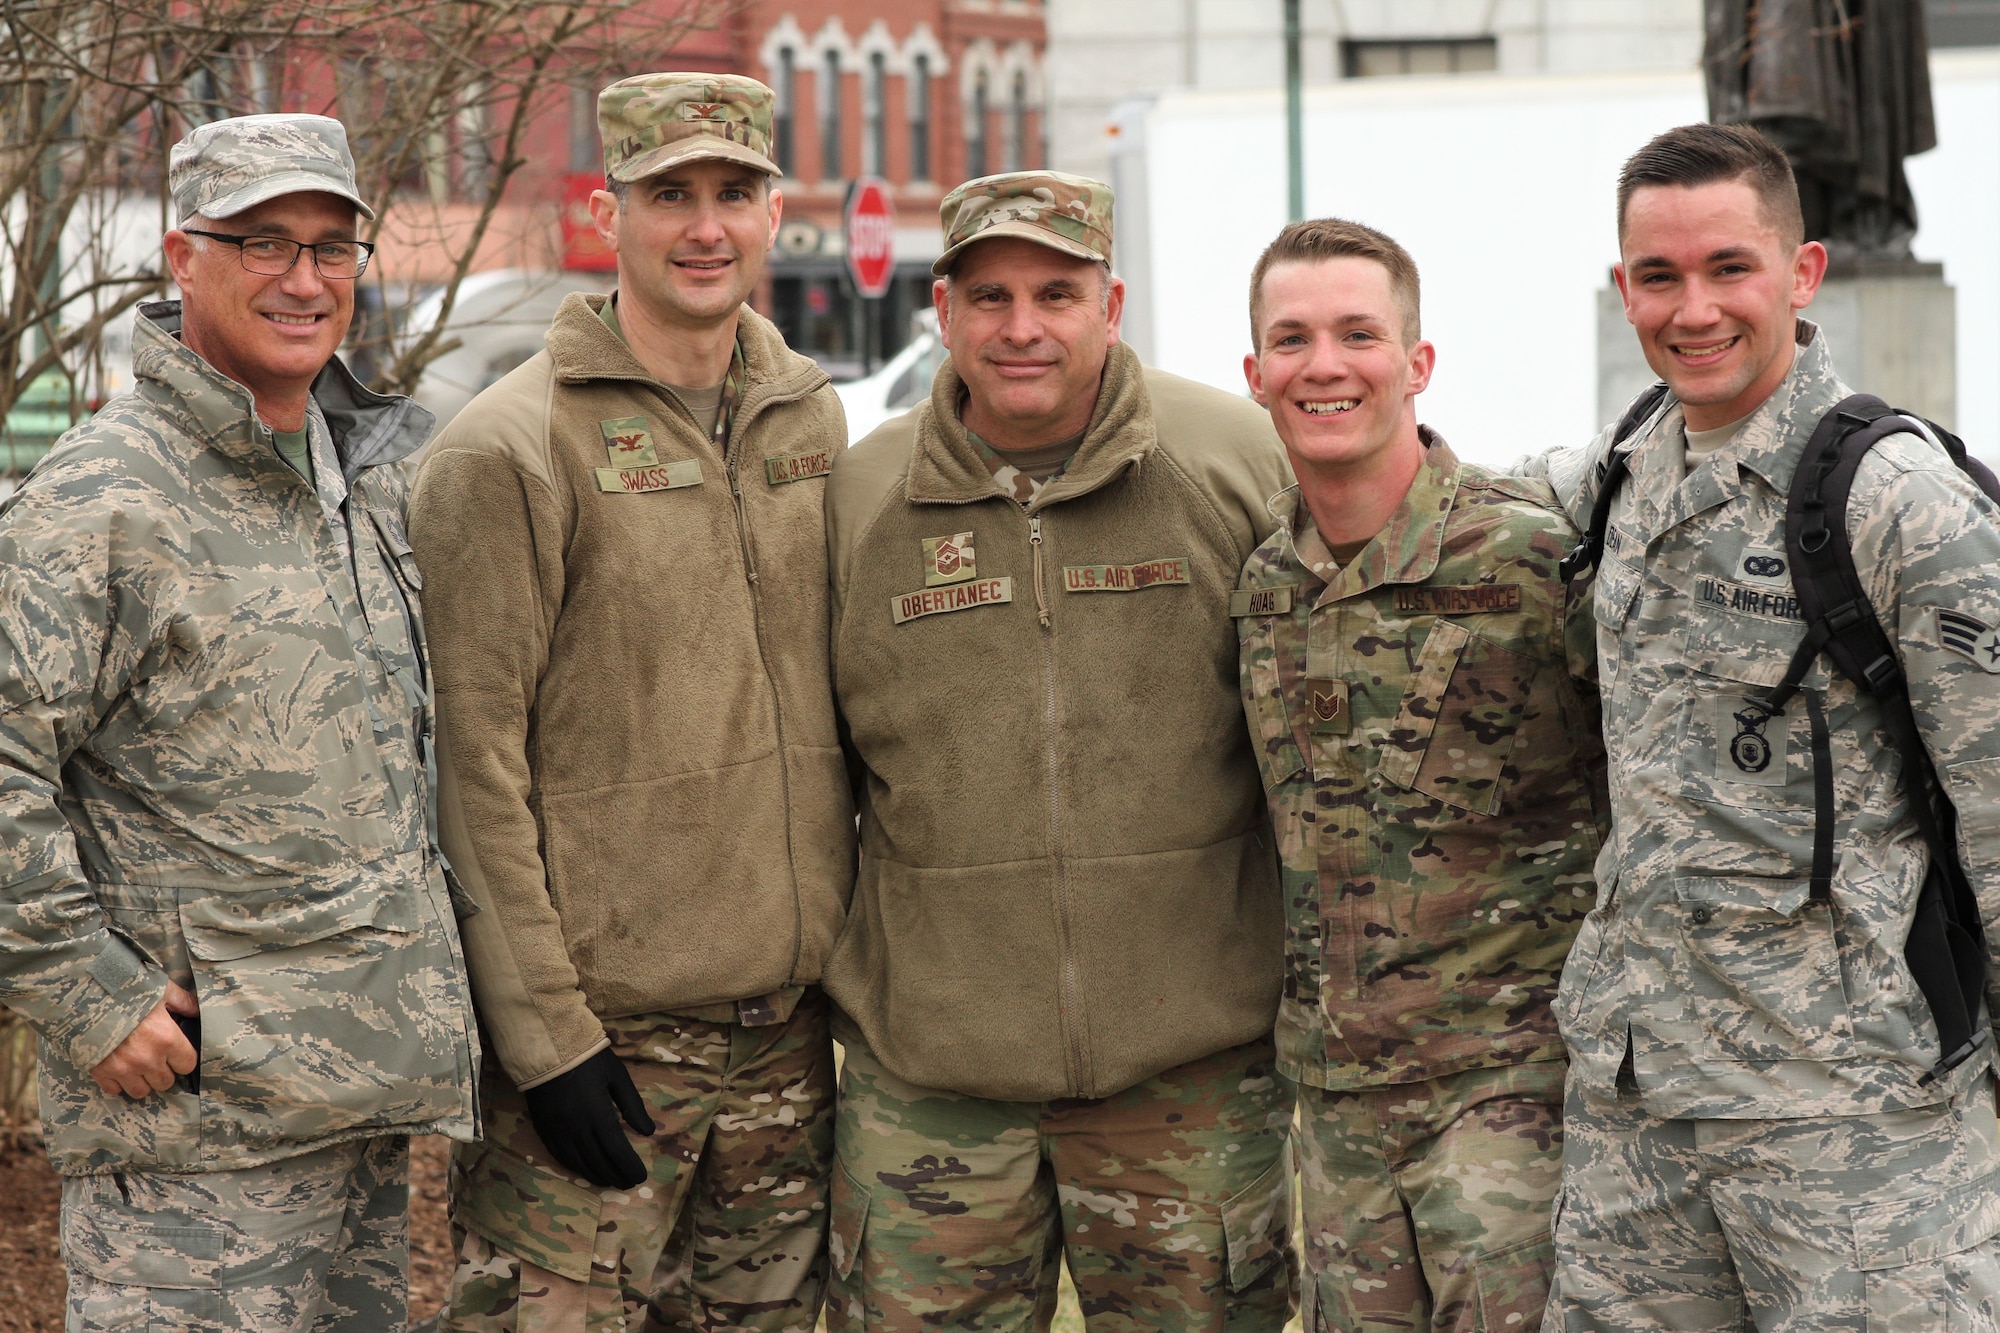 Tech Sgt. Kraig Hoag (fourth from left), a flight sergeant assigned to 157th ARW, poses with fellow airmen after completing a 12-mile ruck march that concluded the NHNG's Best Warrior Competition in Concord, N.H. on April 12. 

Hoag was one of 26 competitors during the four-day competition, which also tested land navigation and marksmanship skills, and involved N.H. Army Guardsmen, a Coast Guardsman, and Salvadoran and Canadian armed forces. Also pictured, Chief Master Sgt. Robert Wheaton, Col. Todd Swass, Chief Master Sgt. David Obertanec, and Senior Airman Devon Dean, who was Hoag's coach and sponsor for the event.